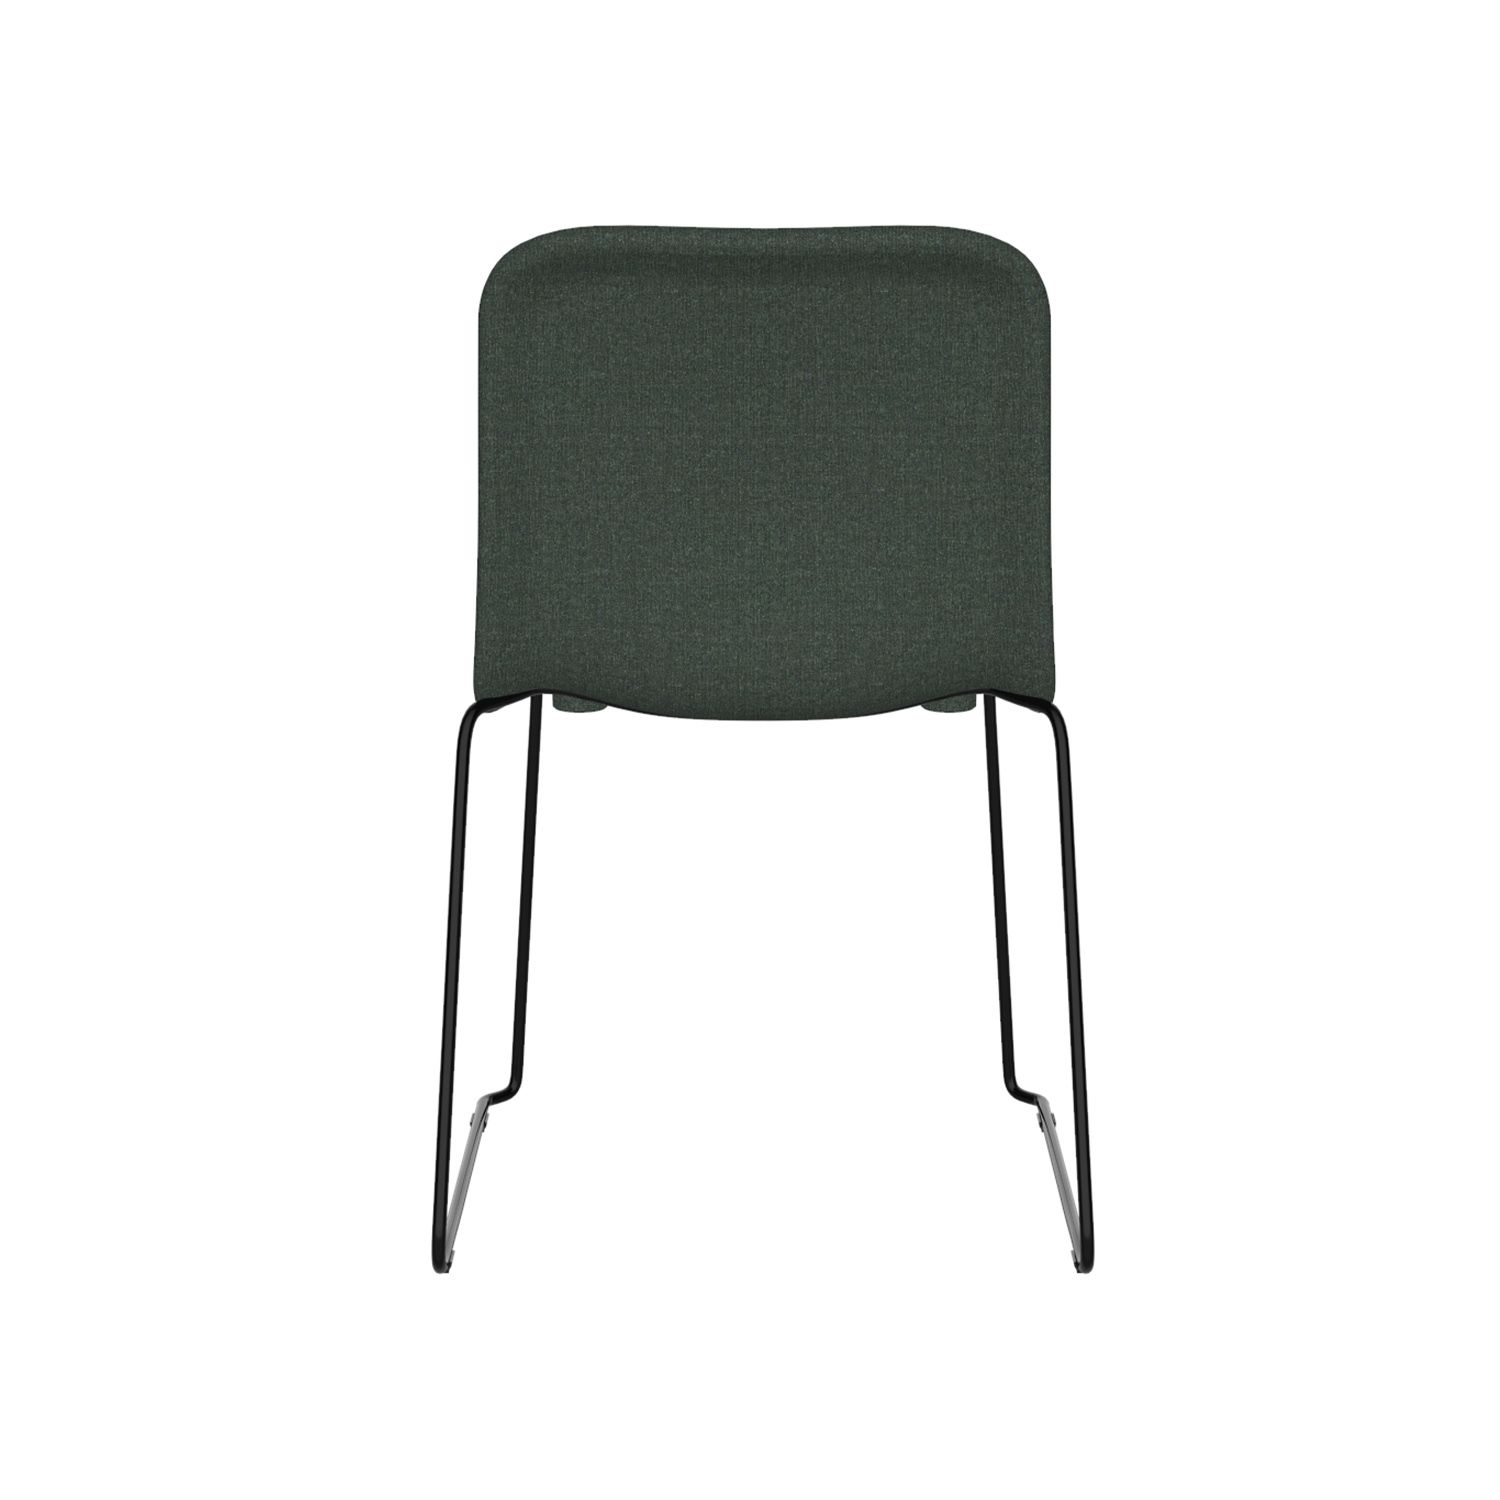 this 141 chair